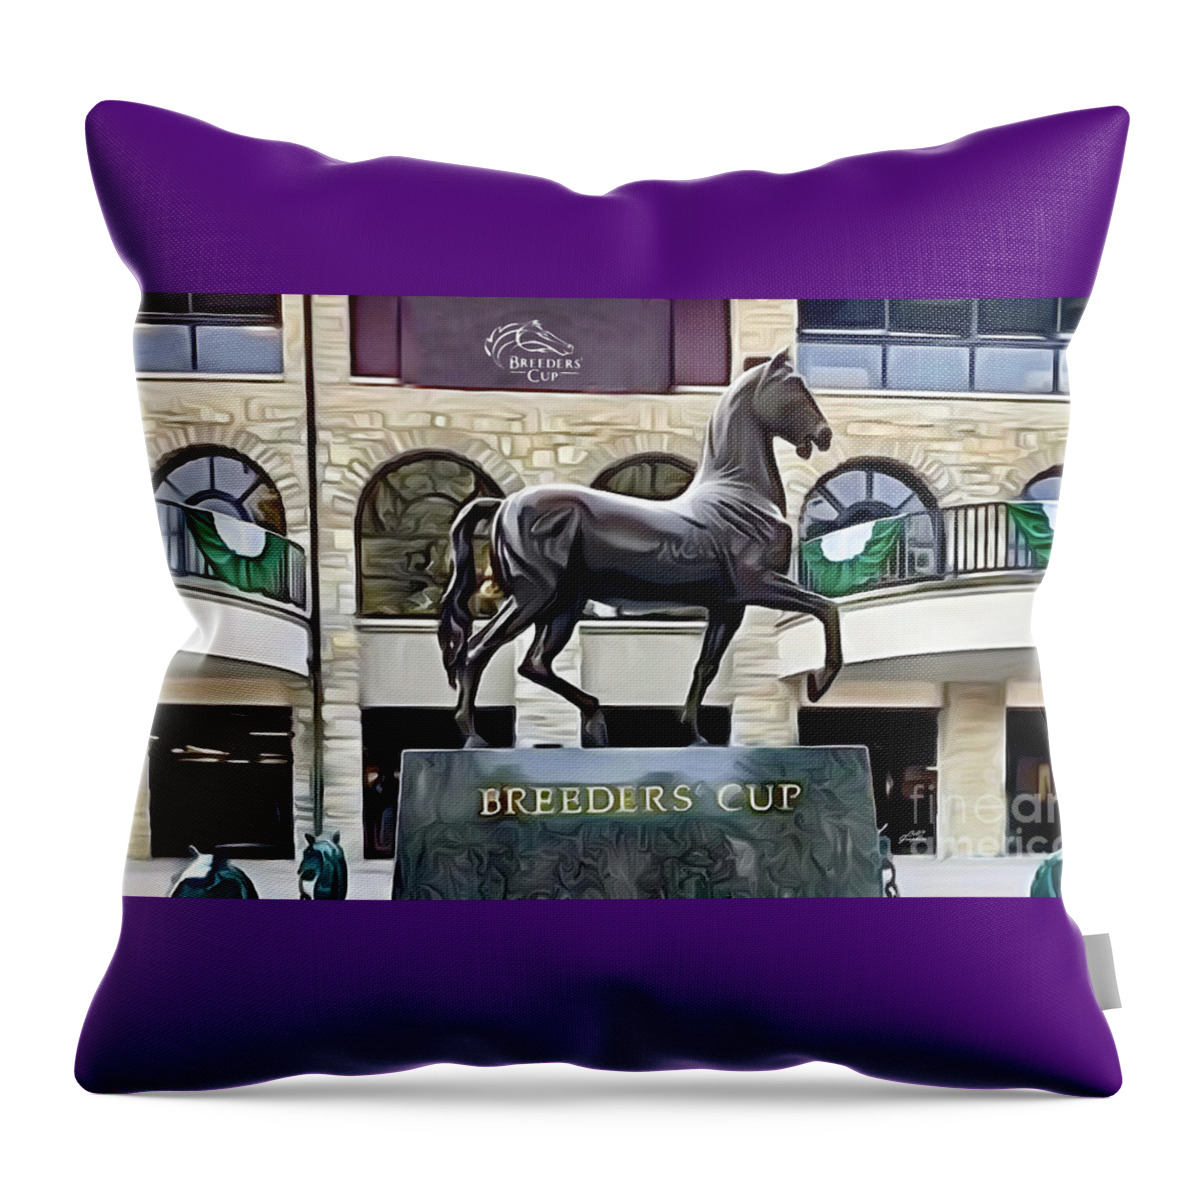 Keeneland Throw Pillow featuring the digital art Keeneland Breeders Cup Statue by CAC Graphics